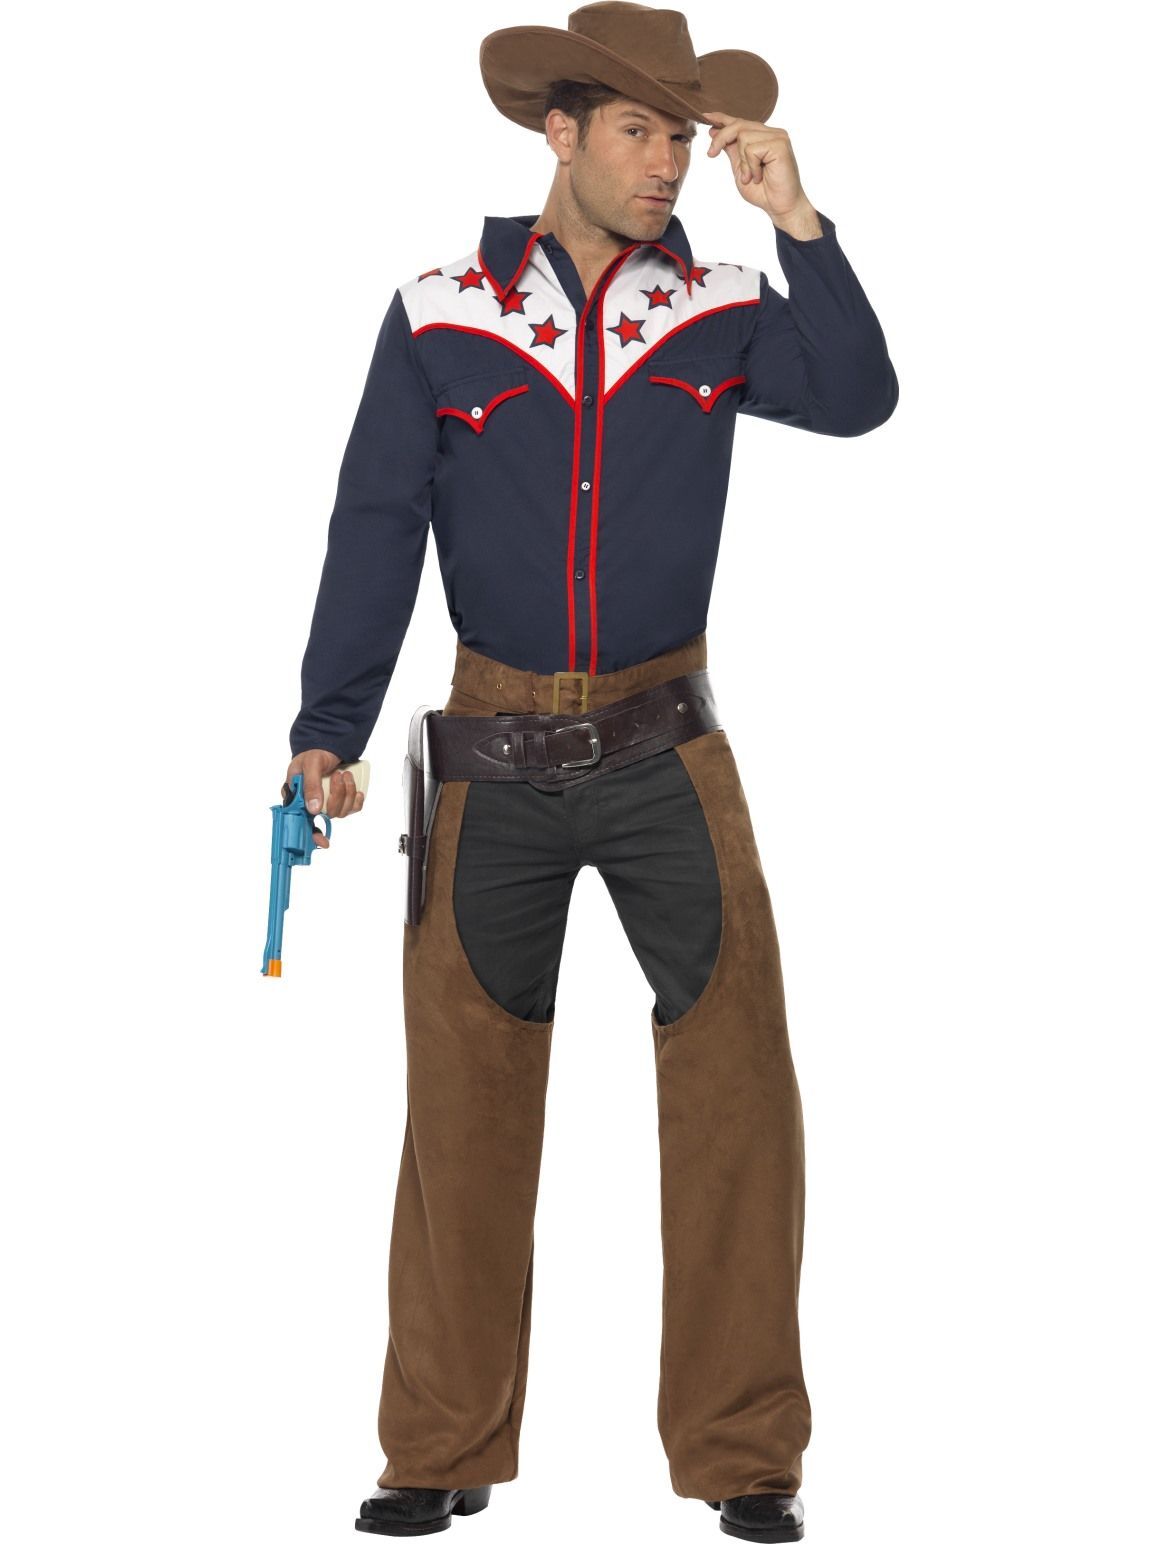 ADULT Cowboy Outfit Fancy Dress Costume XMAS Stag Party Rodeo Wild West Festival